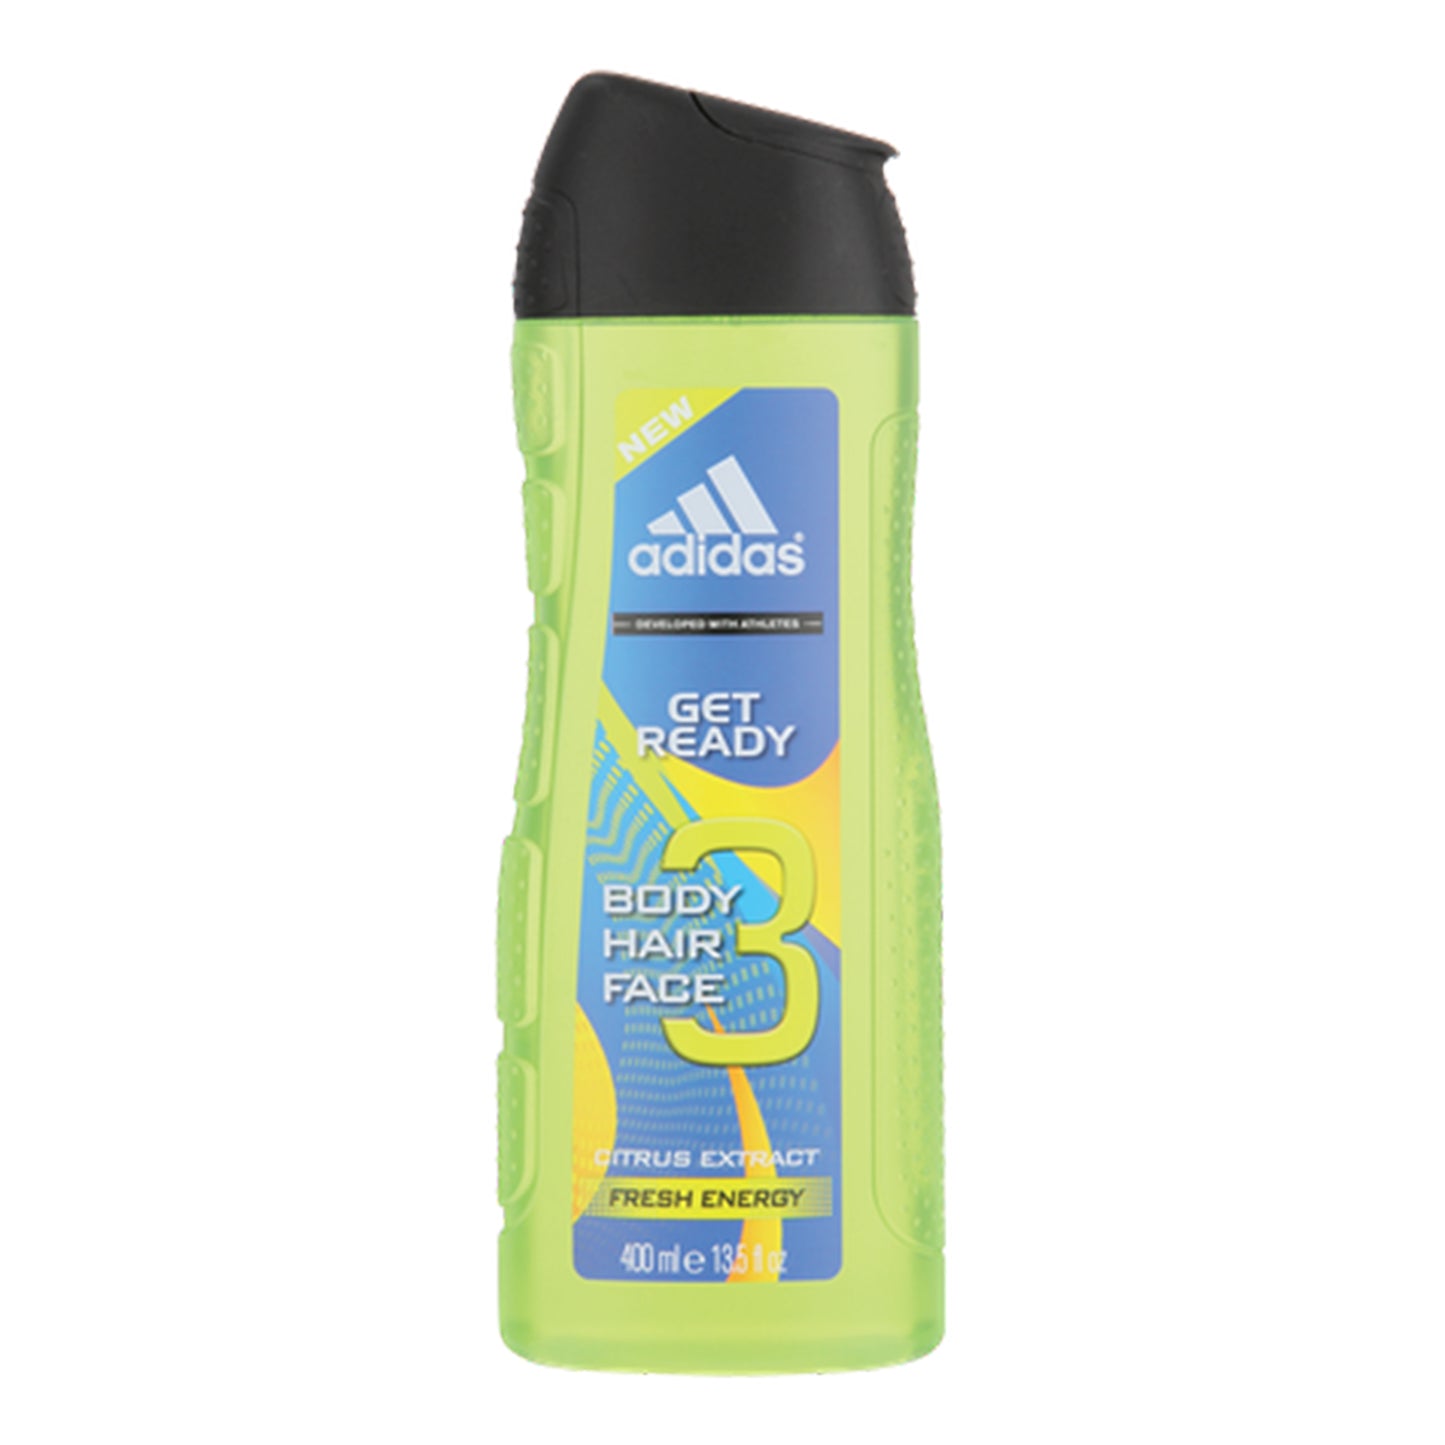 ADIDAS - GET READY FRESH ENERGY 3 IN 1 SHOWER GEL WITH CITRUS EXTRACT - 400ML